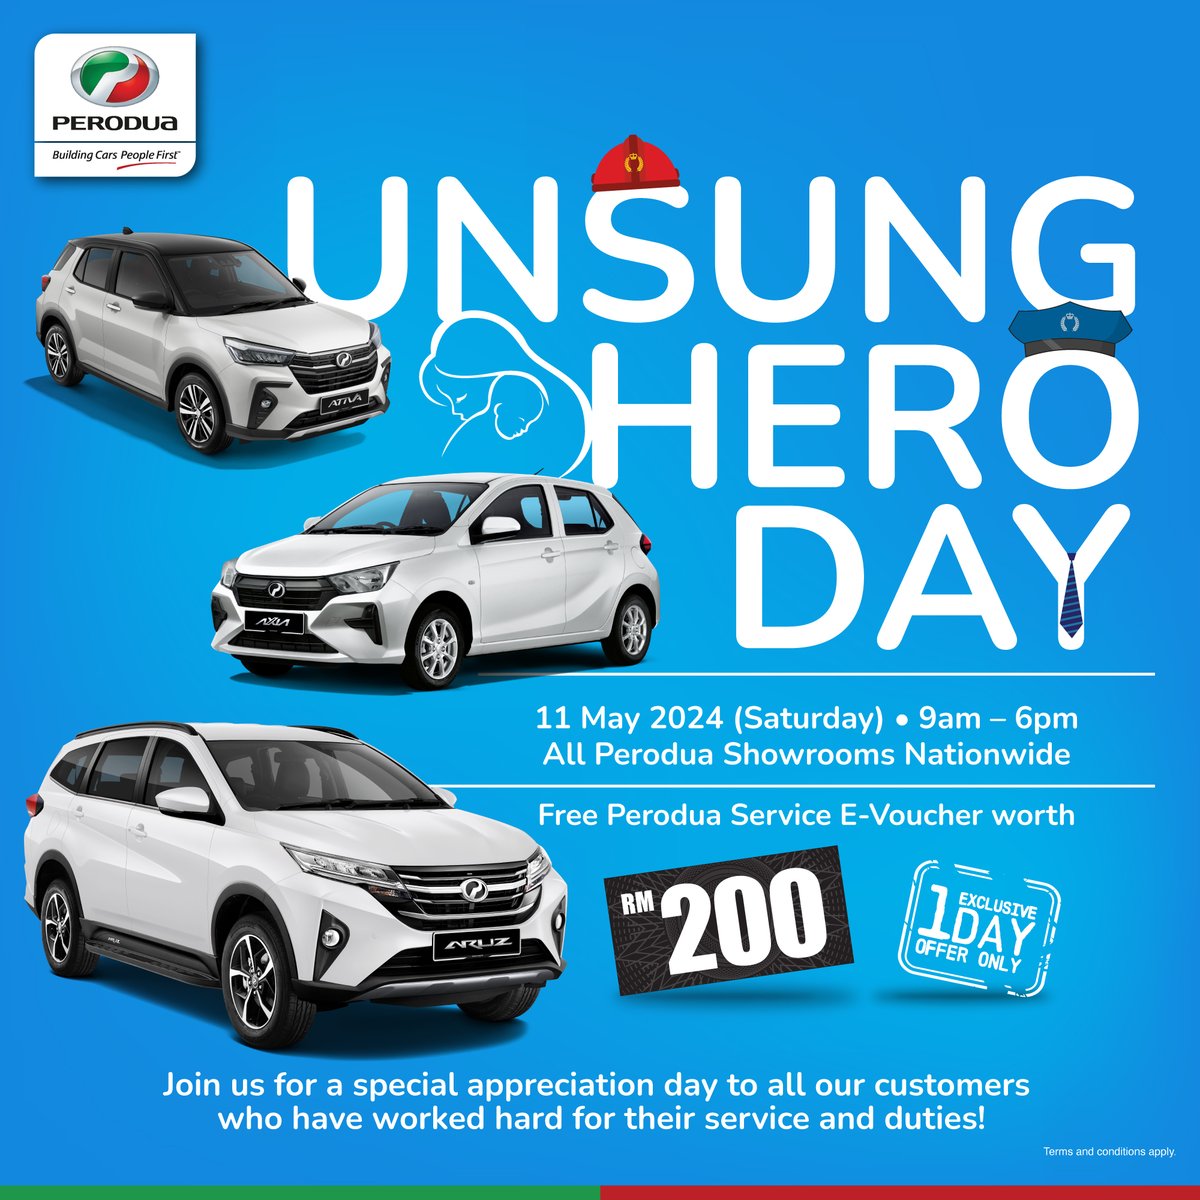 Perodua Unsung Heroes Day is almost here🎉 It's tomorrow!

Join us for a day packed with fun activities and exclusive deals as we celebrate YOU, our incredible Perodua customers! See you there, from 9am to 6 pm!

#Perodua #UnsungHeroes #CustomerDay